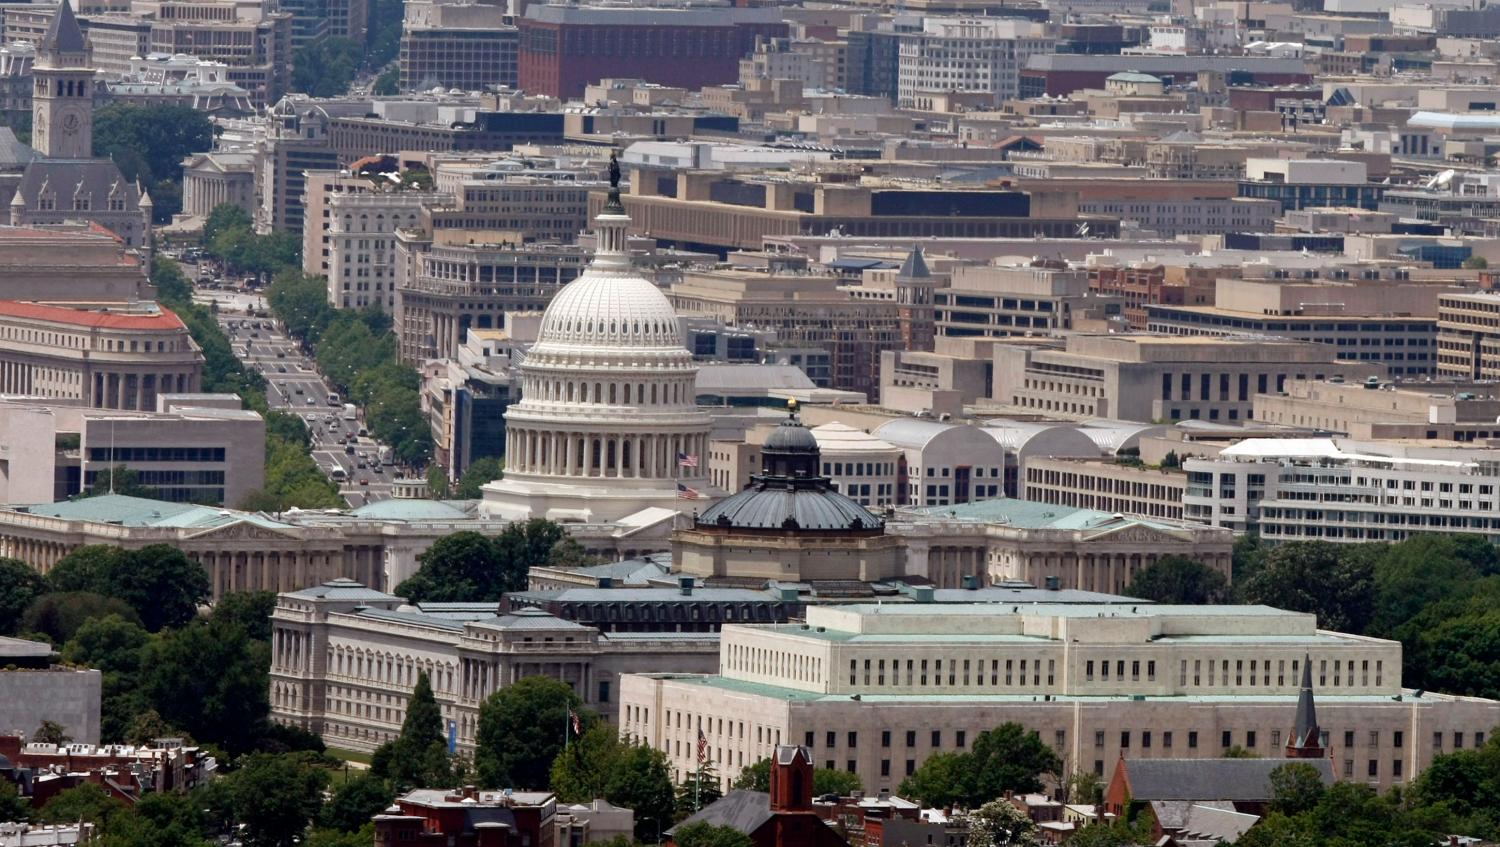 The skyline of Washington DC looking at the U.S. Capitol and Pennsylvania Avenue, May 22, 2009.   REUTERS/Larry Downing (UNITED STATES POLITICS CITYSCAPE) - GM1E55N09B001